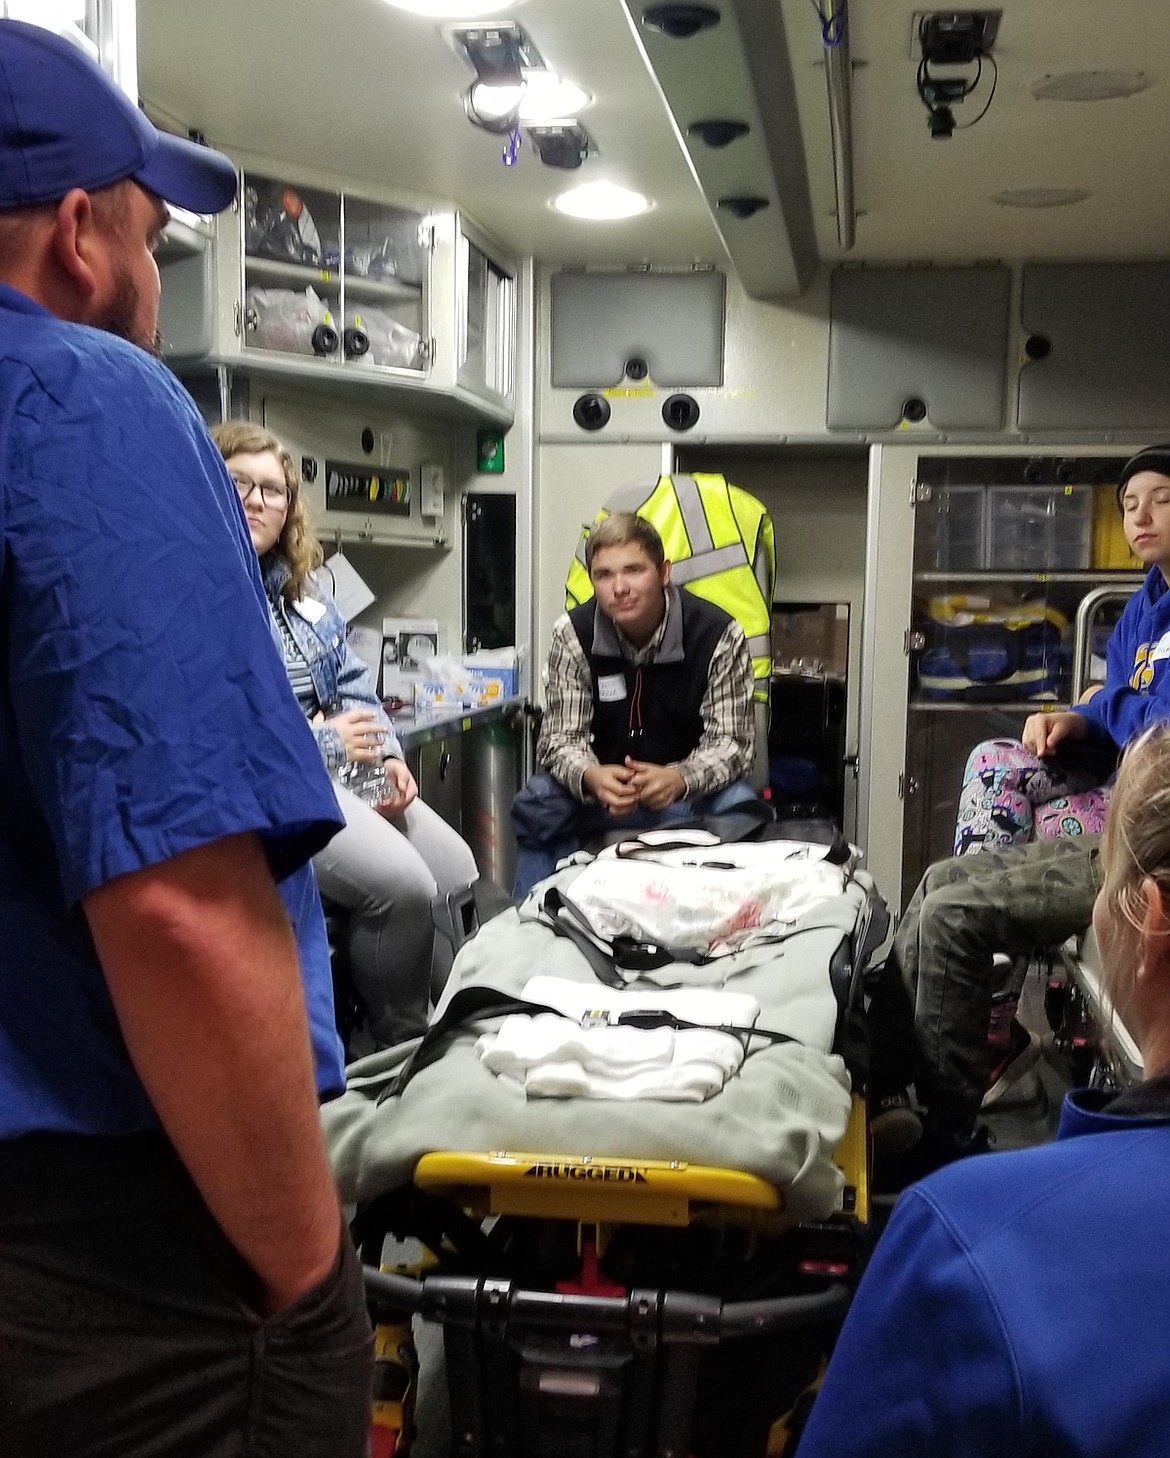 Cody Sentell and Kasey Kim of the Libby Volunteer Ambulance Service taught area teens about their work in the community on Dec. 15. (Photo courtesy Jerica O'Neil)